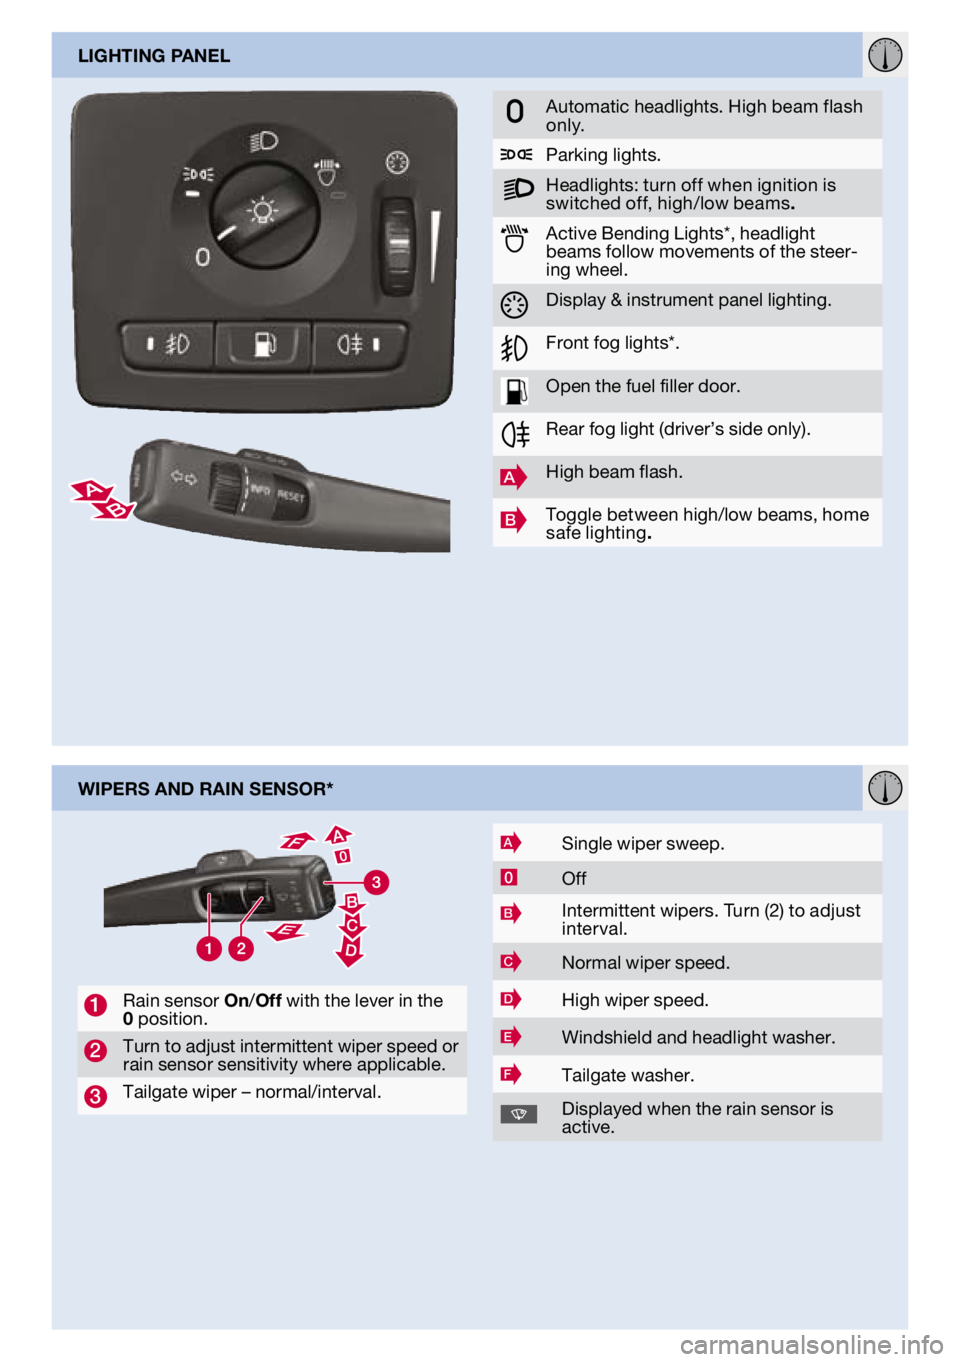 VOLVO V50 2011  Quick Guide 
lIghtIng panel
wIpers and raIn sensor*
1rain sensor on/off with the lever in the 0 position. 
2Turn to adjust intermittent wiper speed or rain sensor sensitivity where applicable.
3Tailgate wiper –